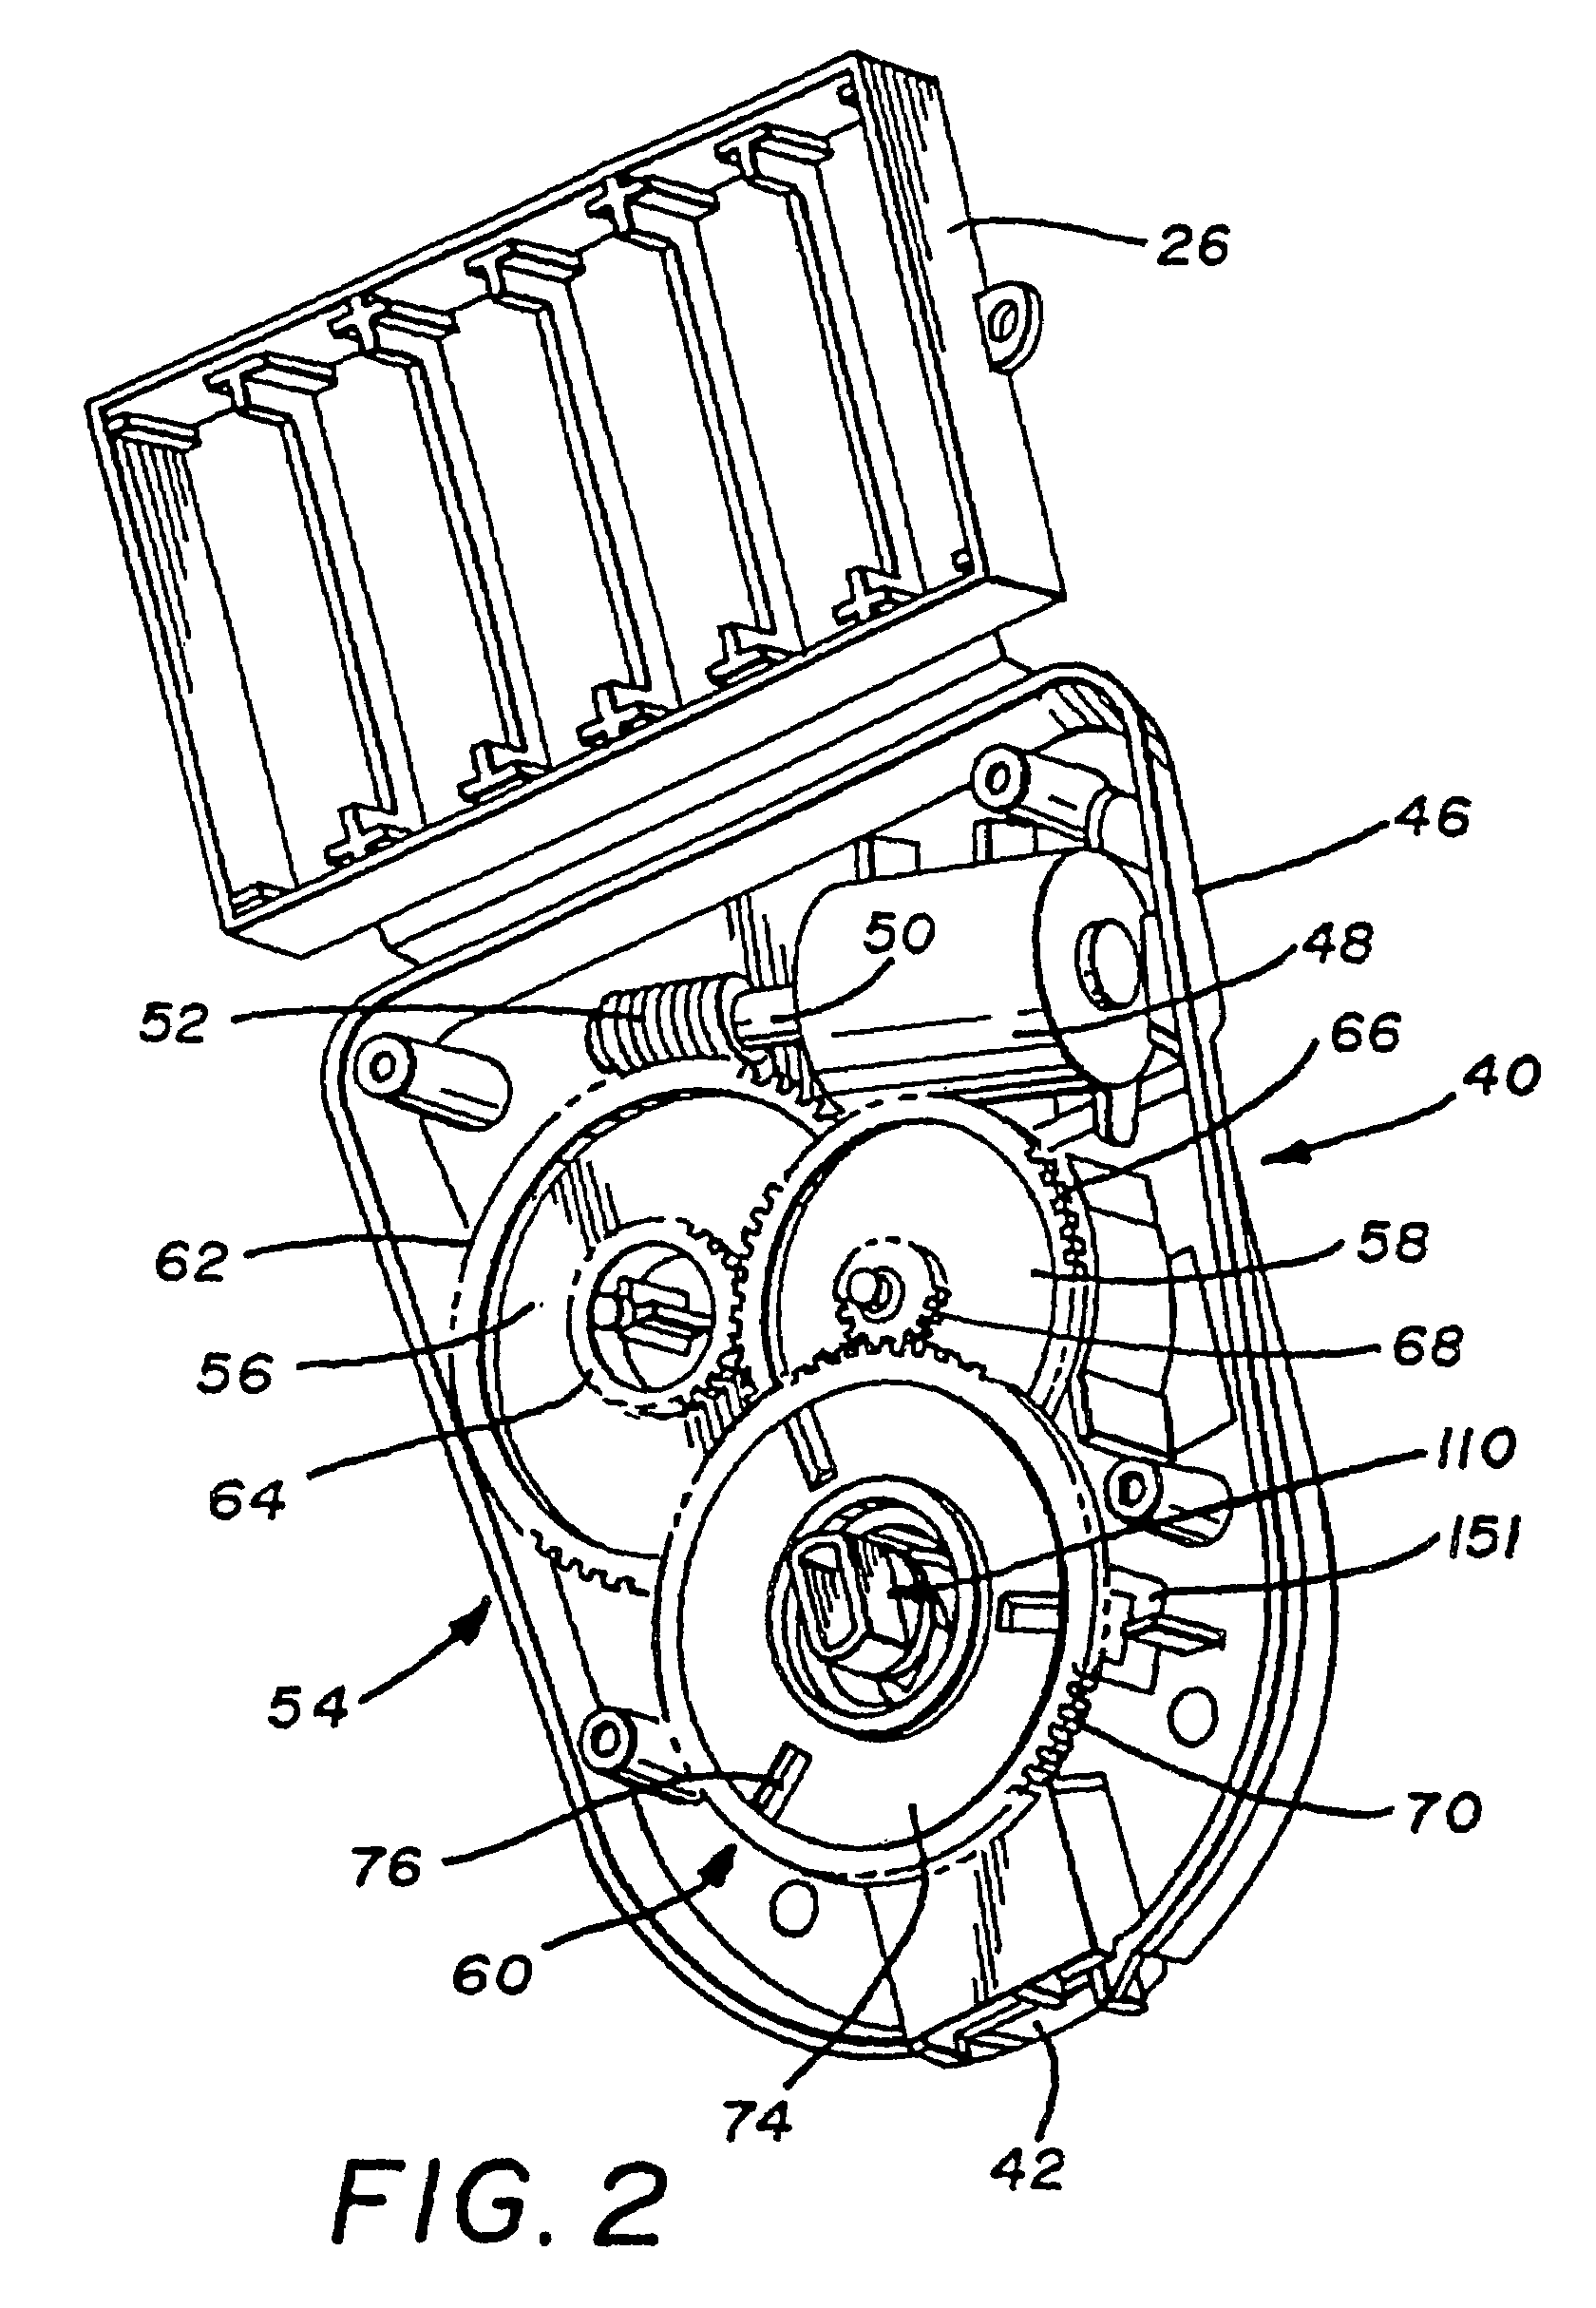 Apparatus for hands-free dispensing of a measured quantity of material